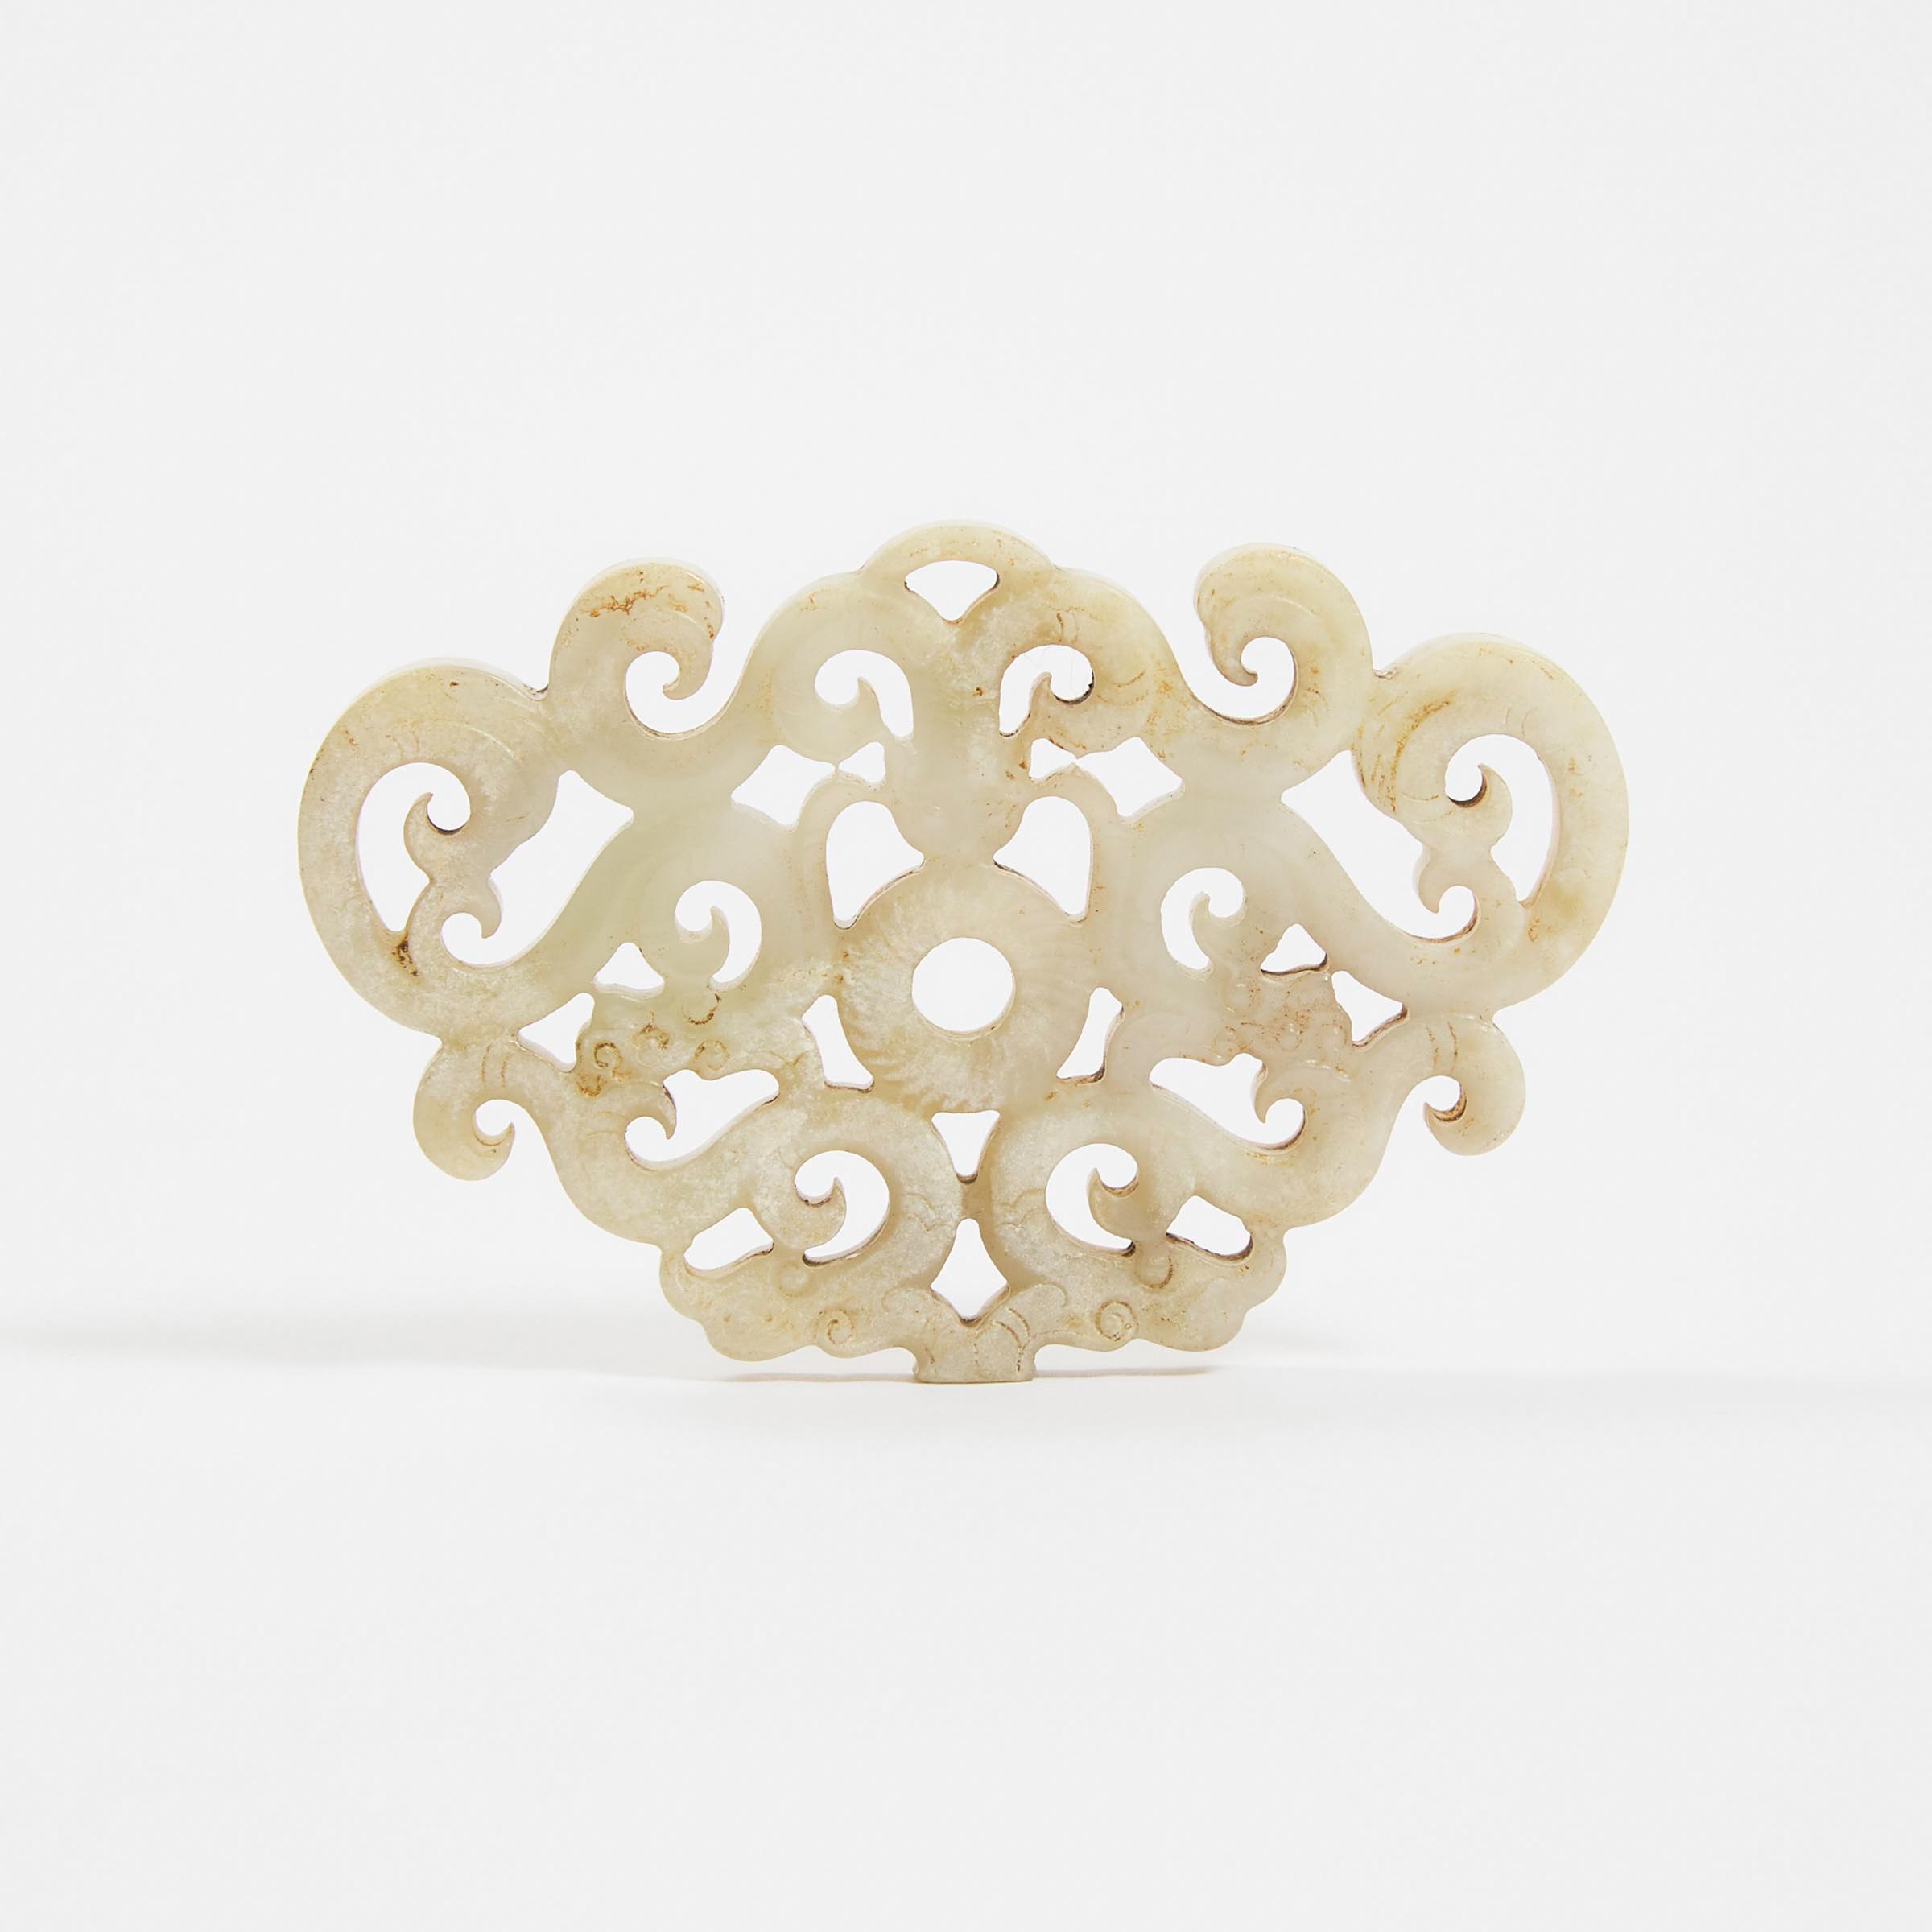 A White and Russet Archaistic Jade 'Chilong' Pendant